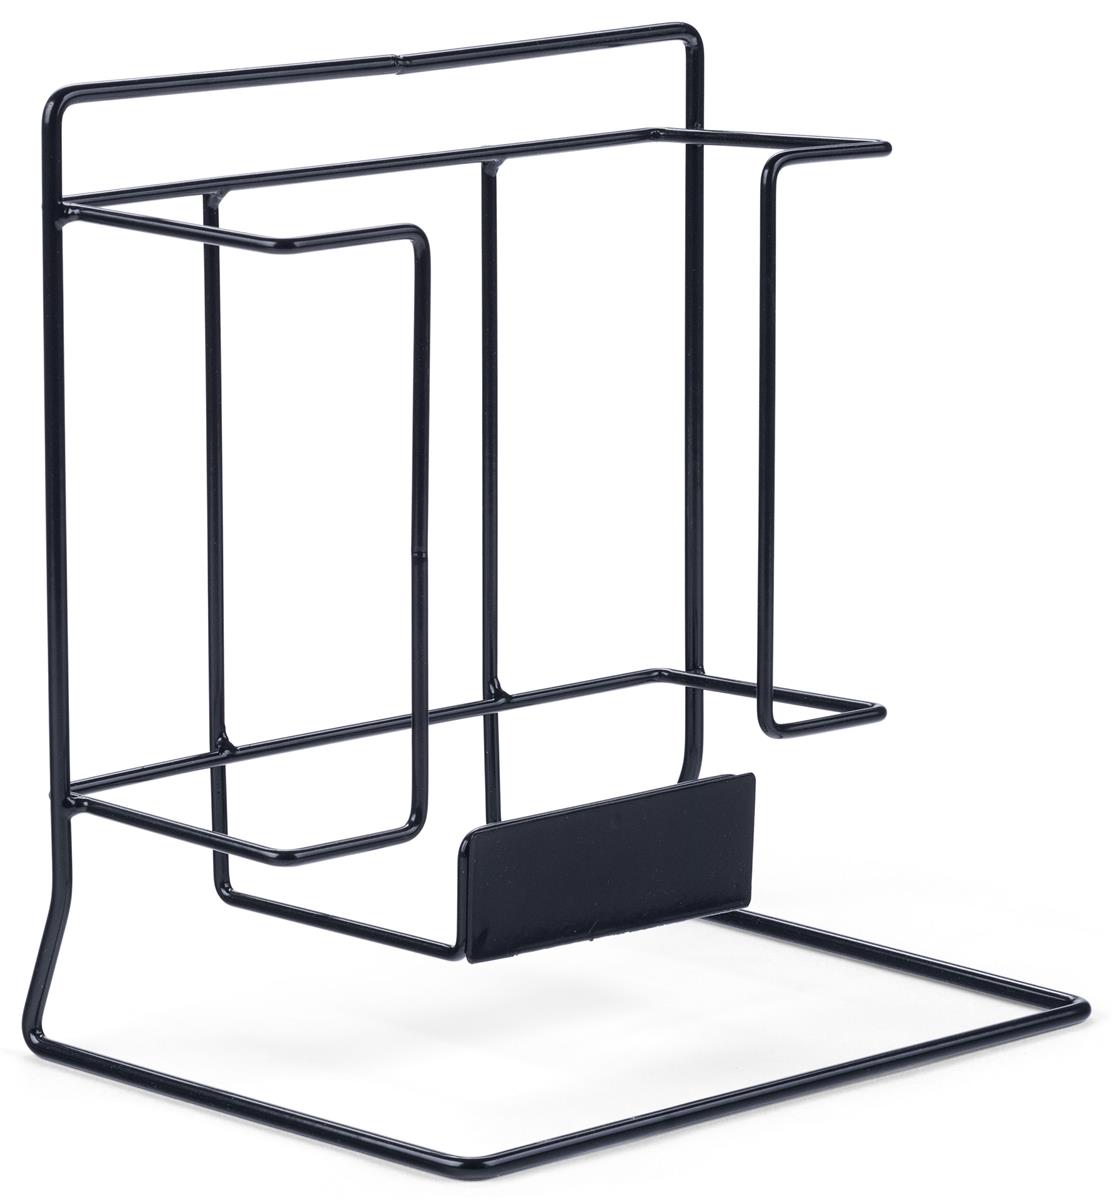 Single Wire Magazine Rack | Label Holder Included